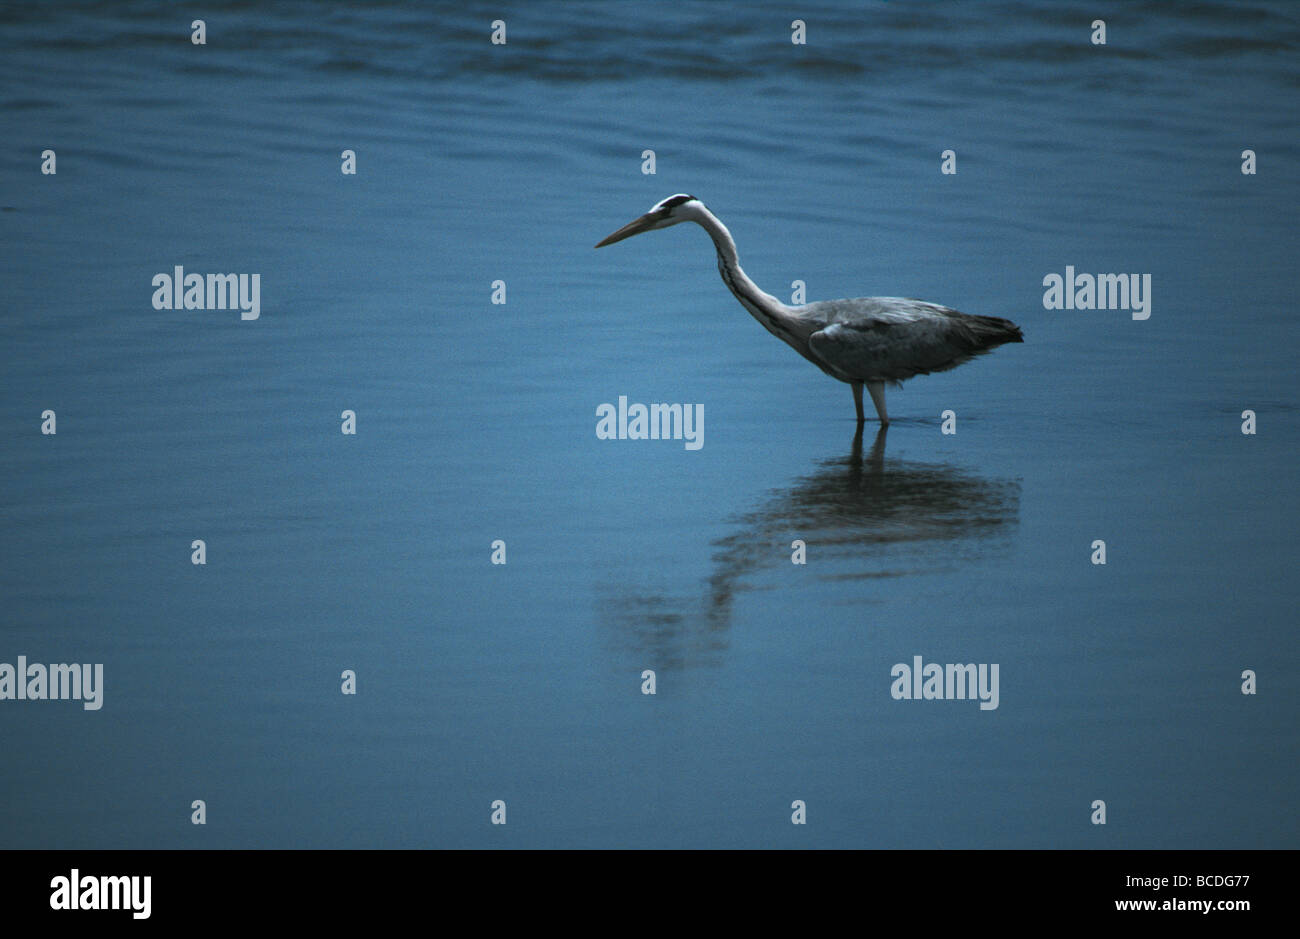 An elegant Grey Heron patiently hunts for fish in a tidal pool. Stock Photo